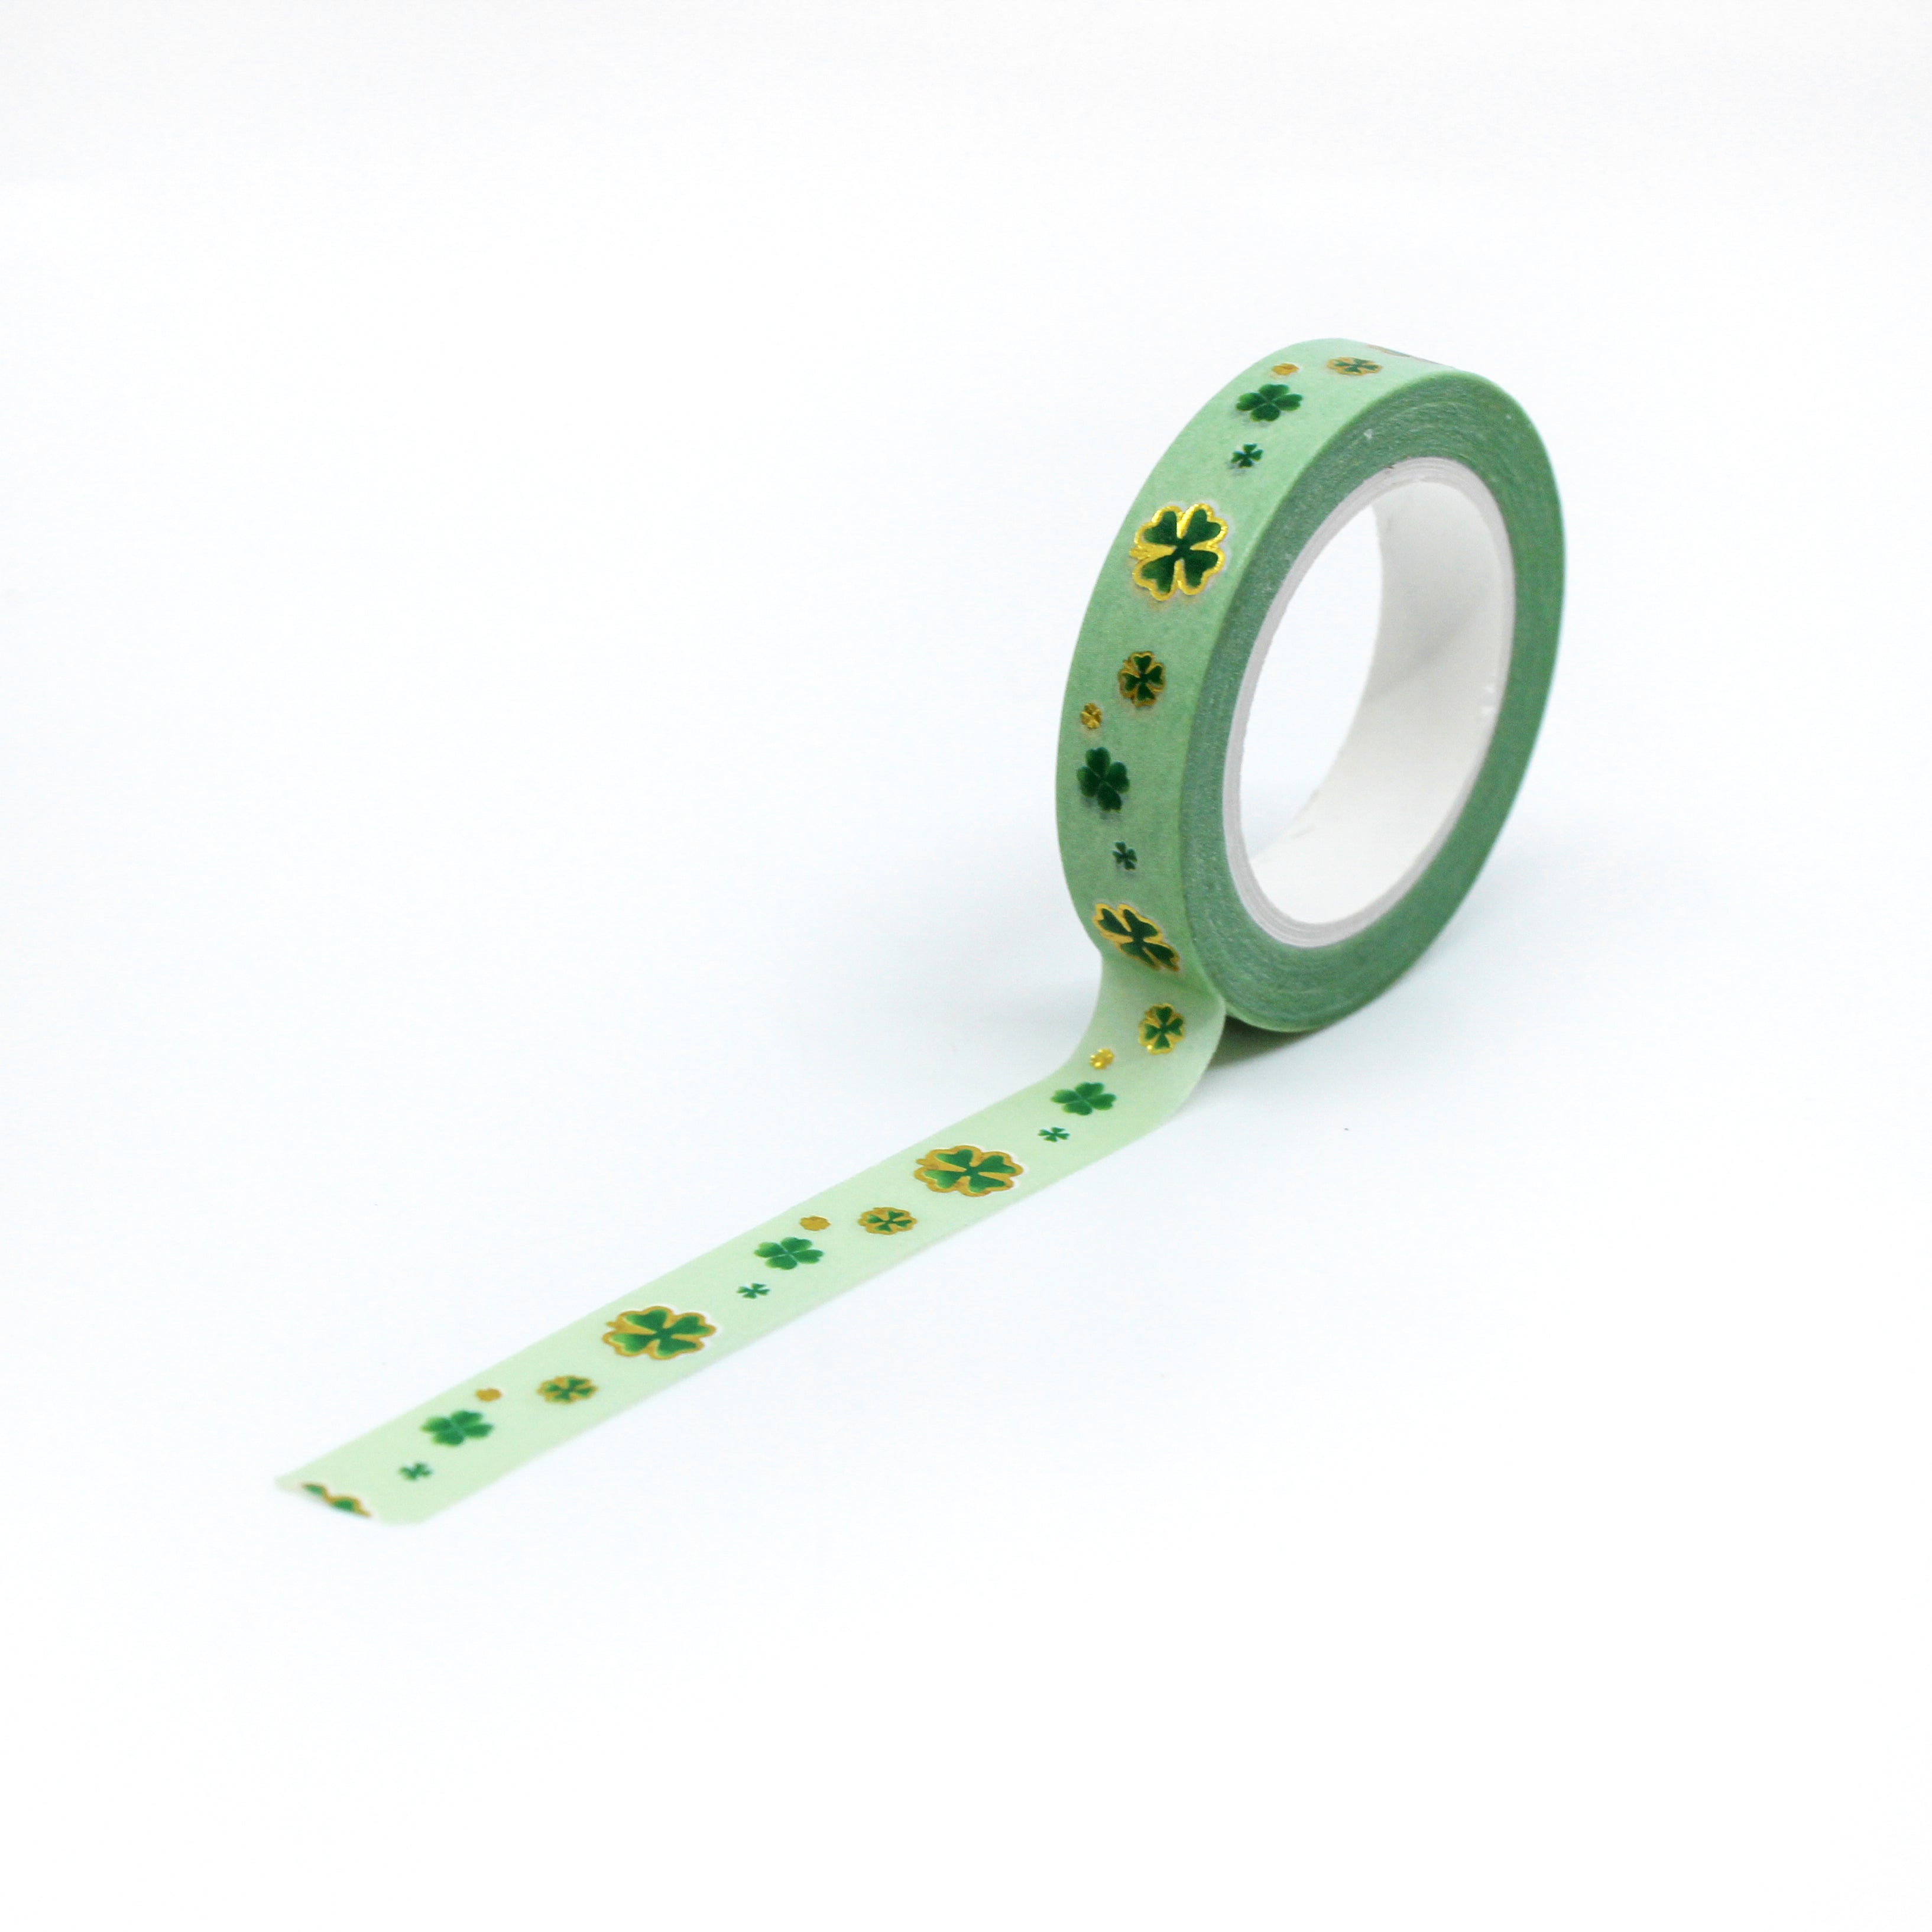 Green & Gold Foil Clover Washi Tape: Celebrate St. Patrick's Day or add a touch of luck to your projects with this charming washi tape featuring a pattern of green clovers accented with gold foil. Ideal for crafts, cards, and decor. This tape is sold at BBB Supplies craft Shop.